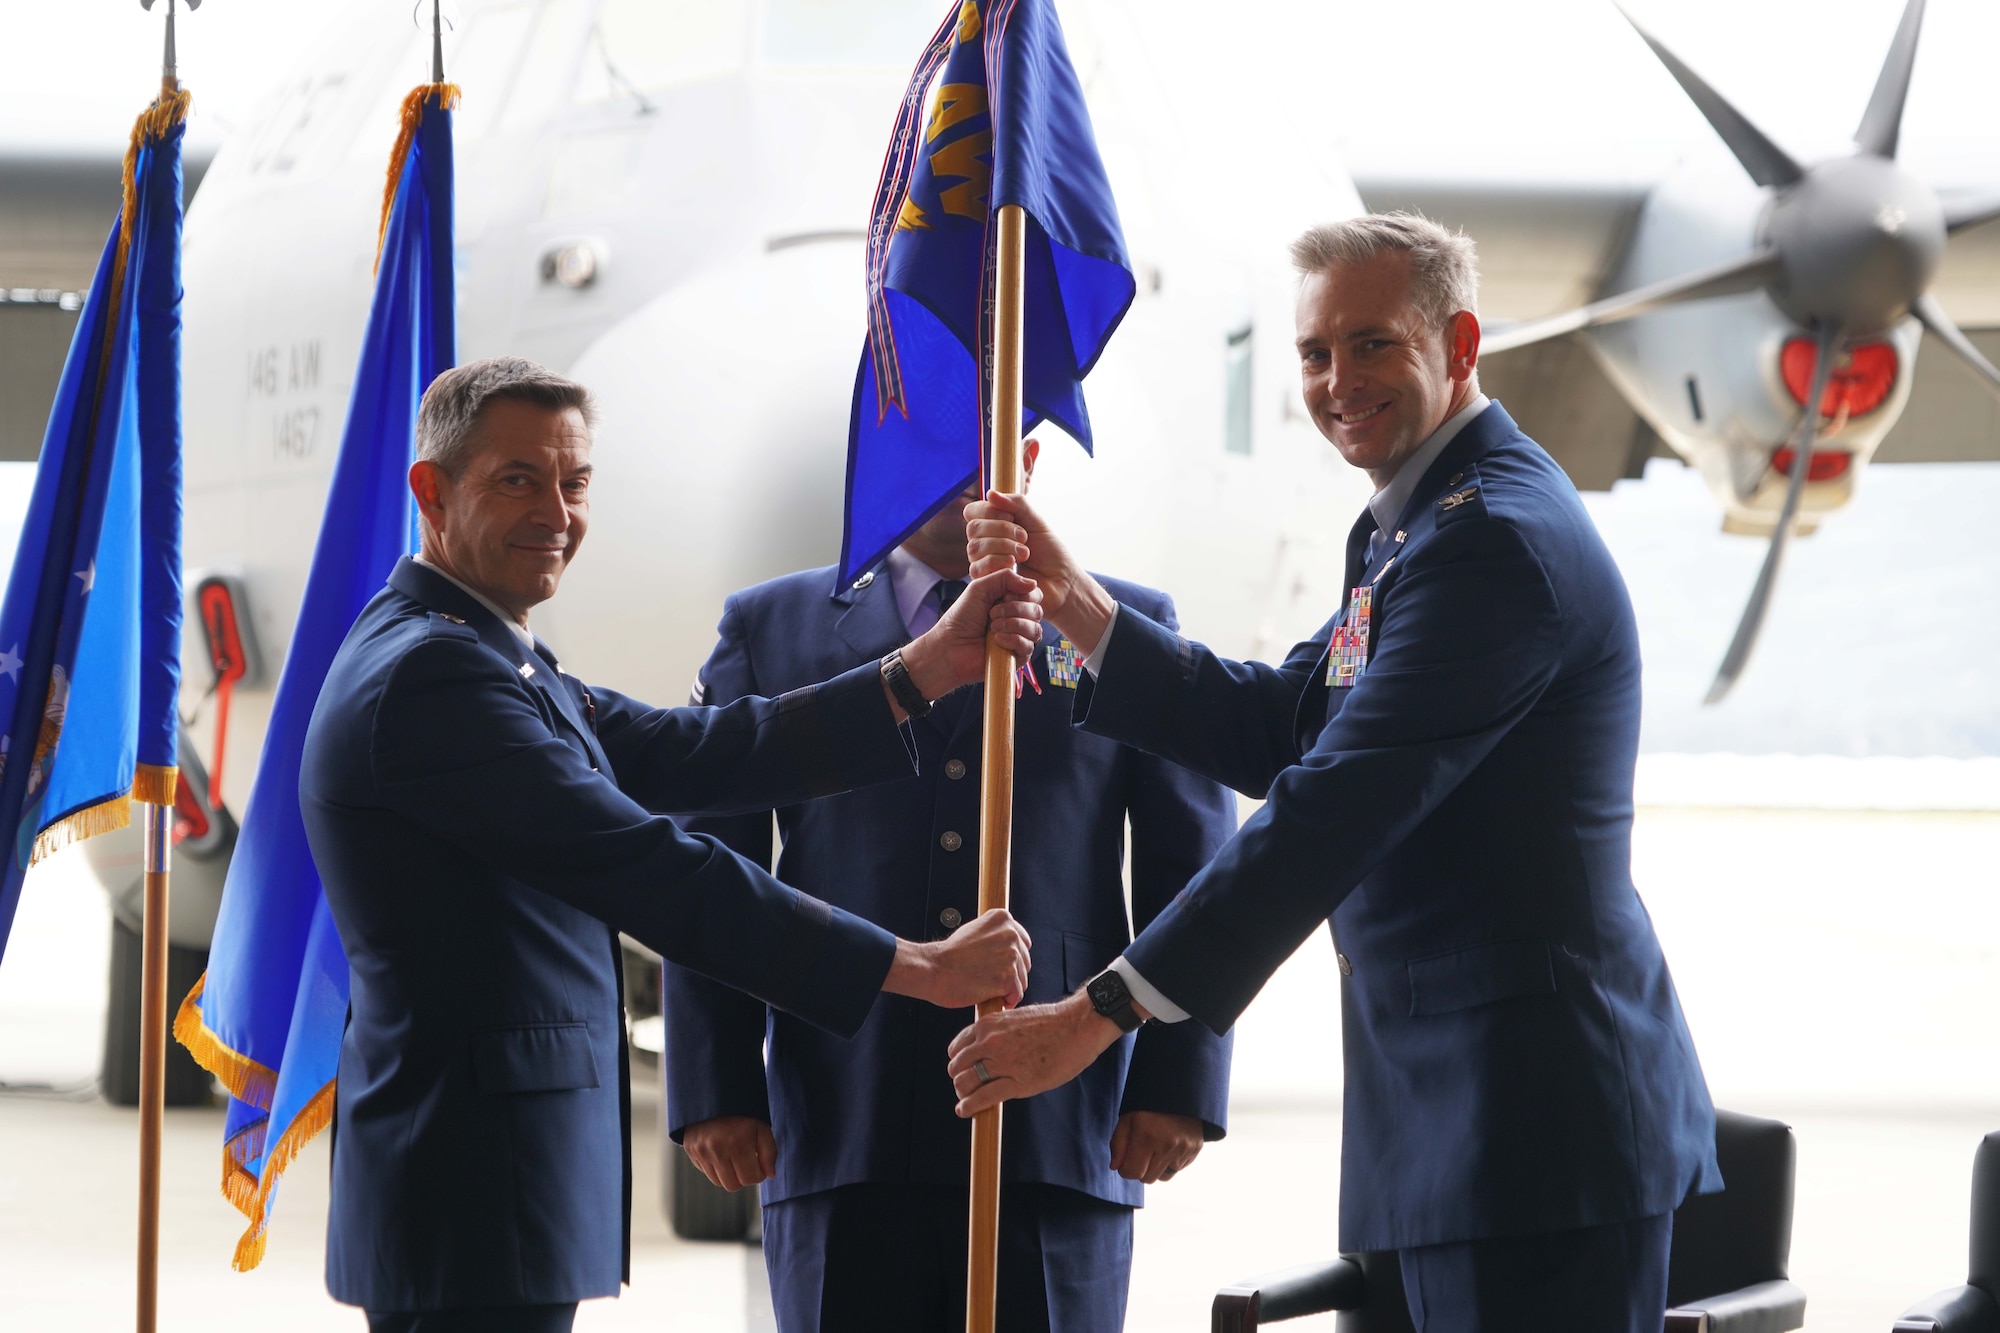 Two men hold a unit flag and smile at the camera.